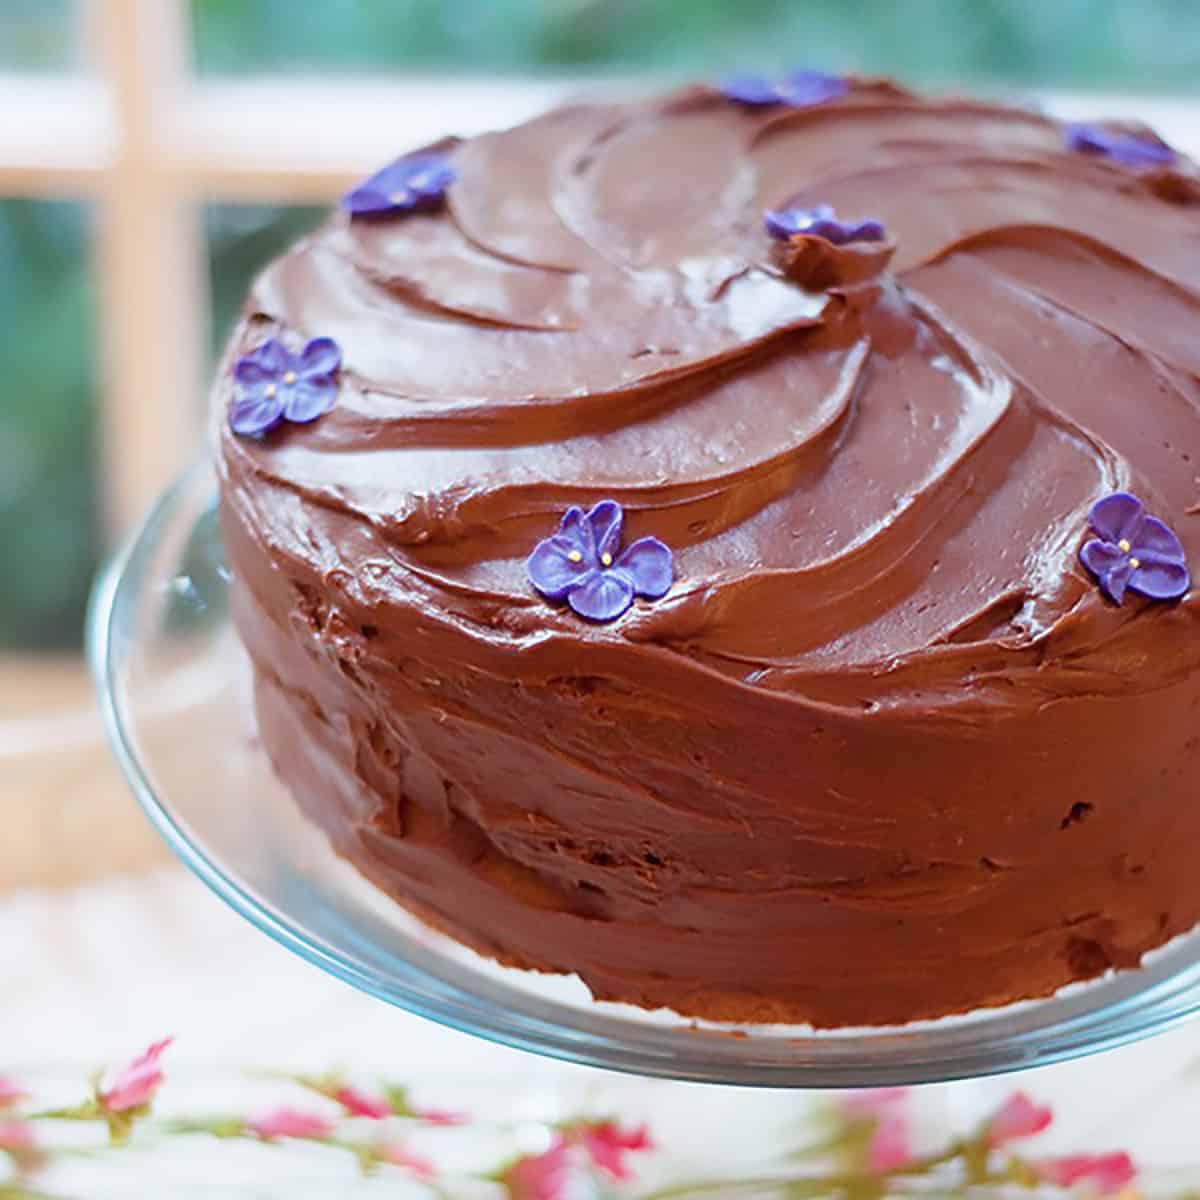 Chocolate cake with floral decorations on a glass pedestal.